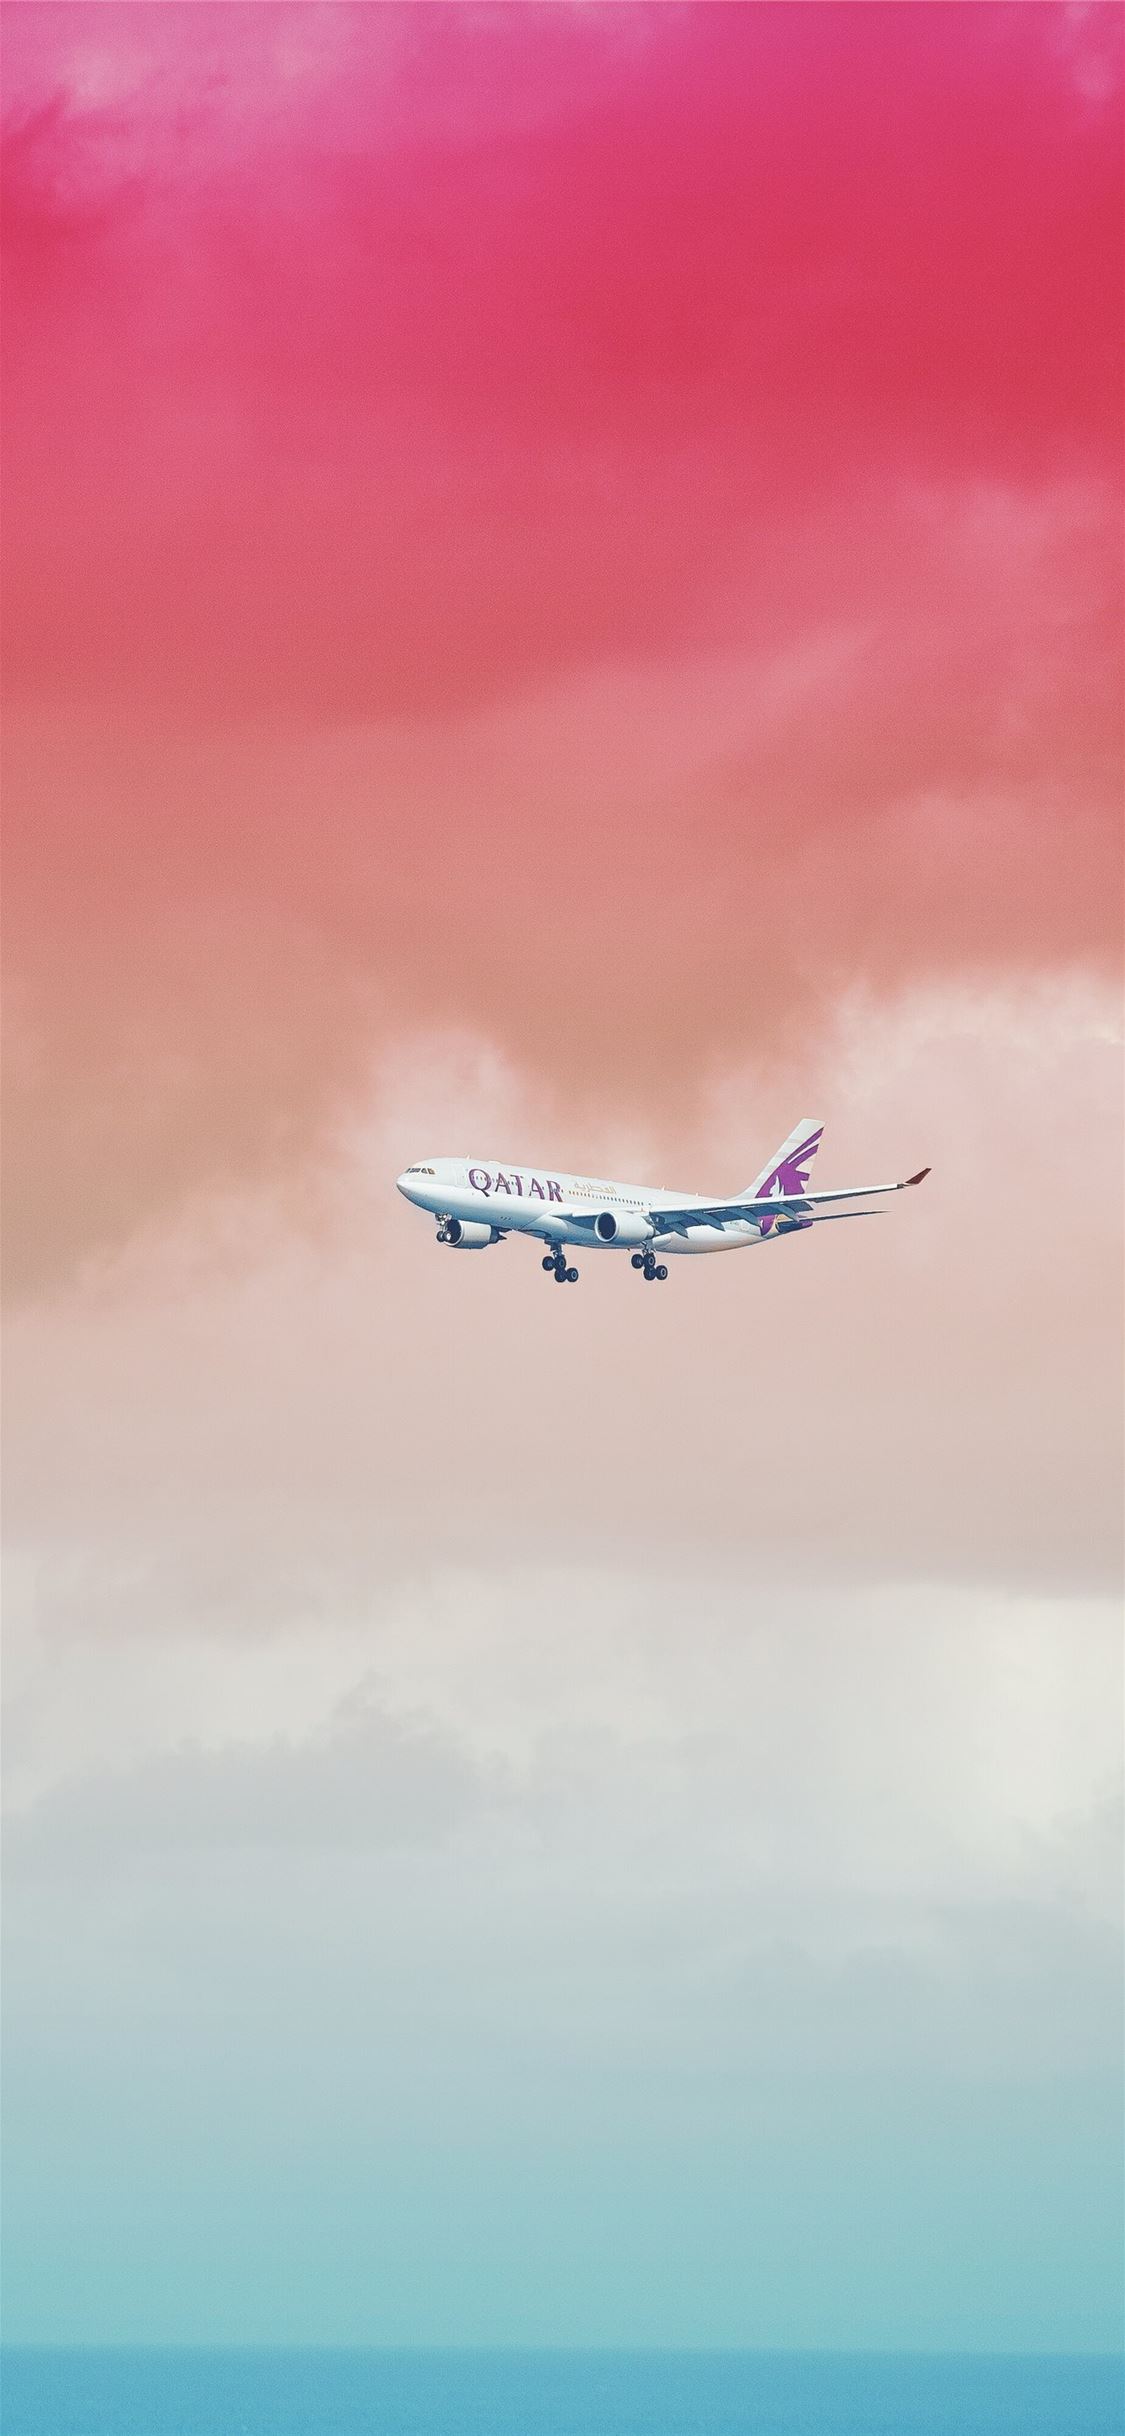 Qatar Airlines airplane flying under red cloud for... iPhone X Wallpapers  Free Download